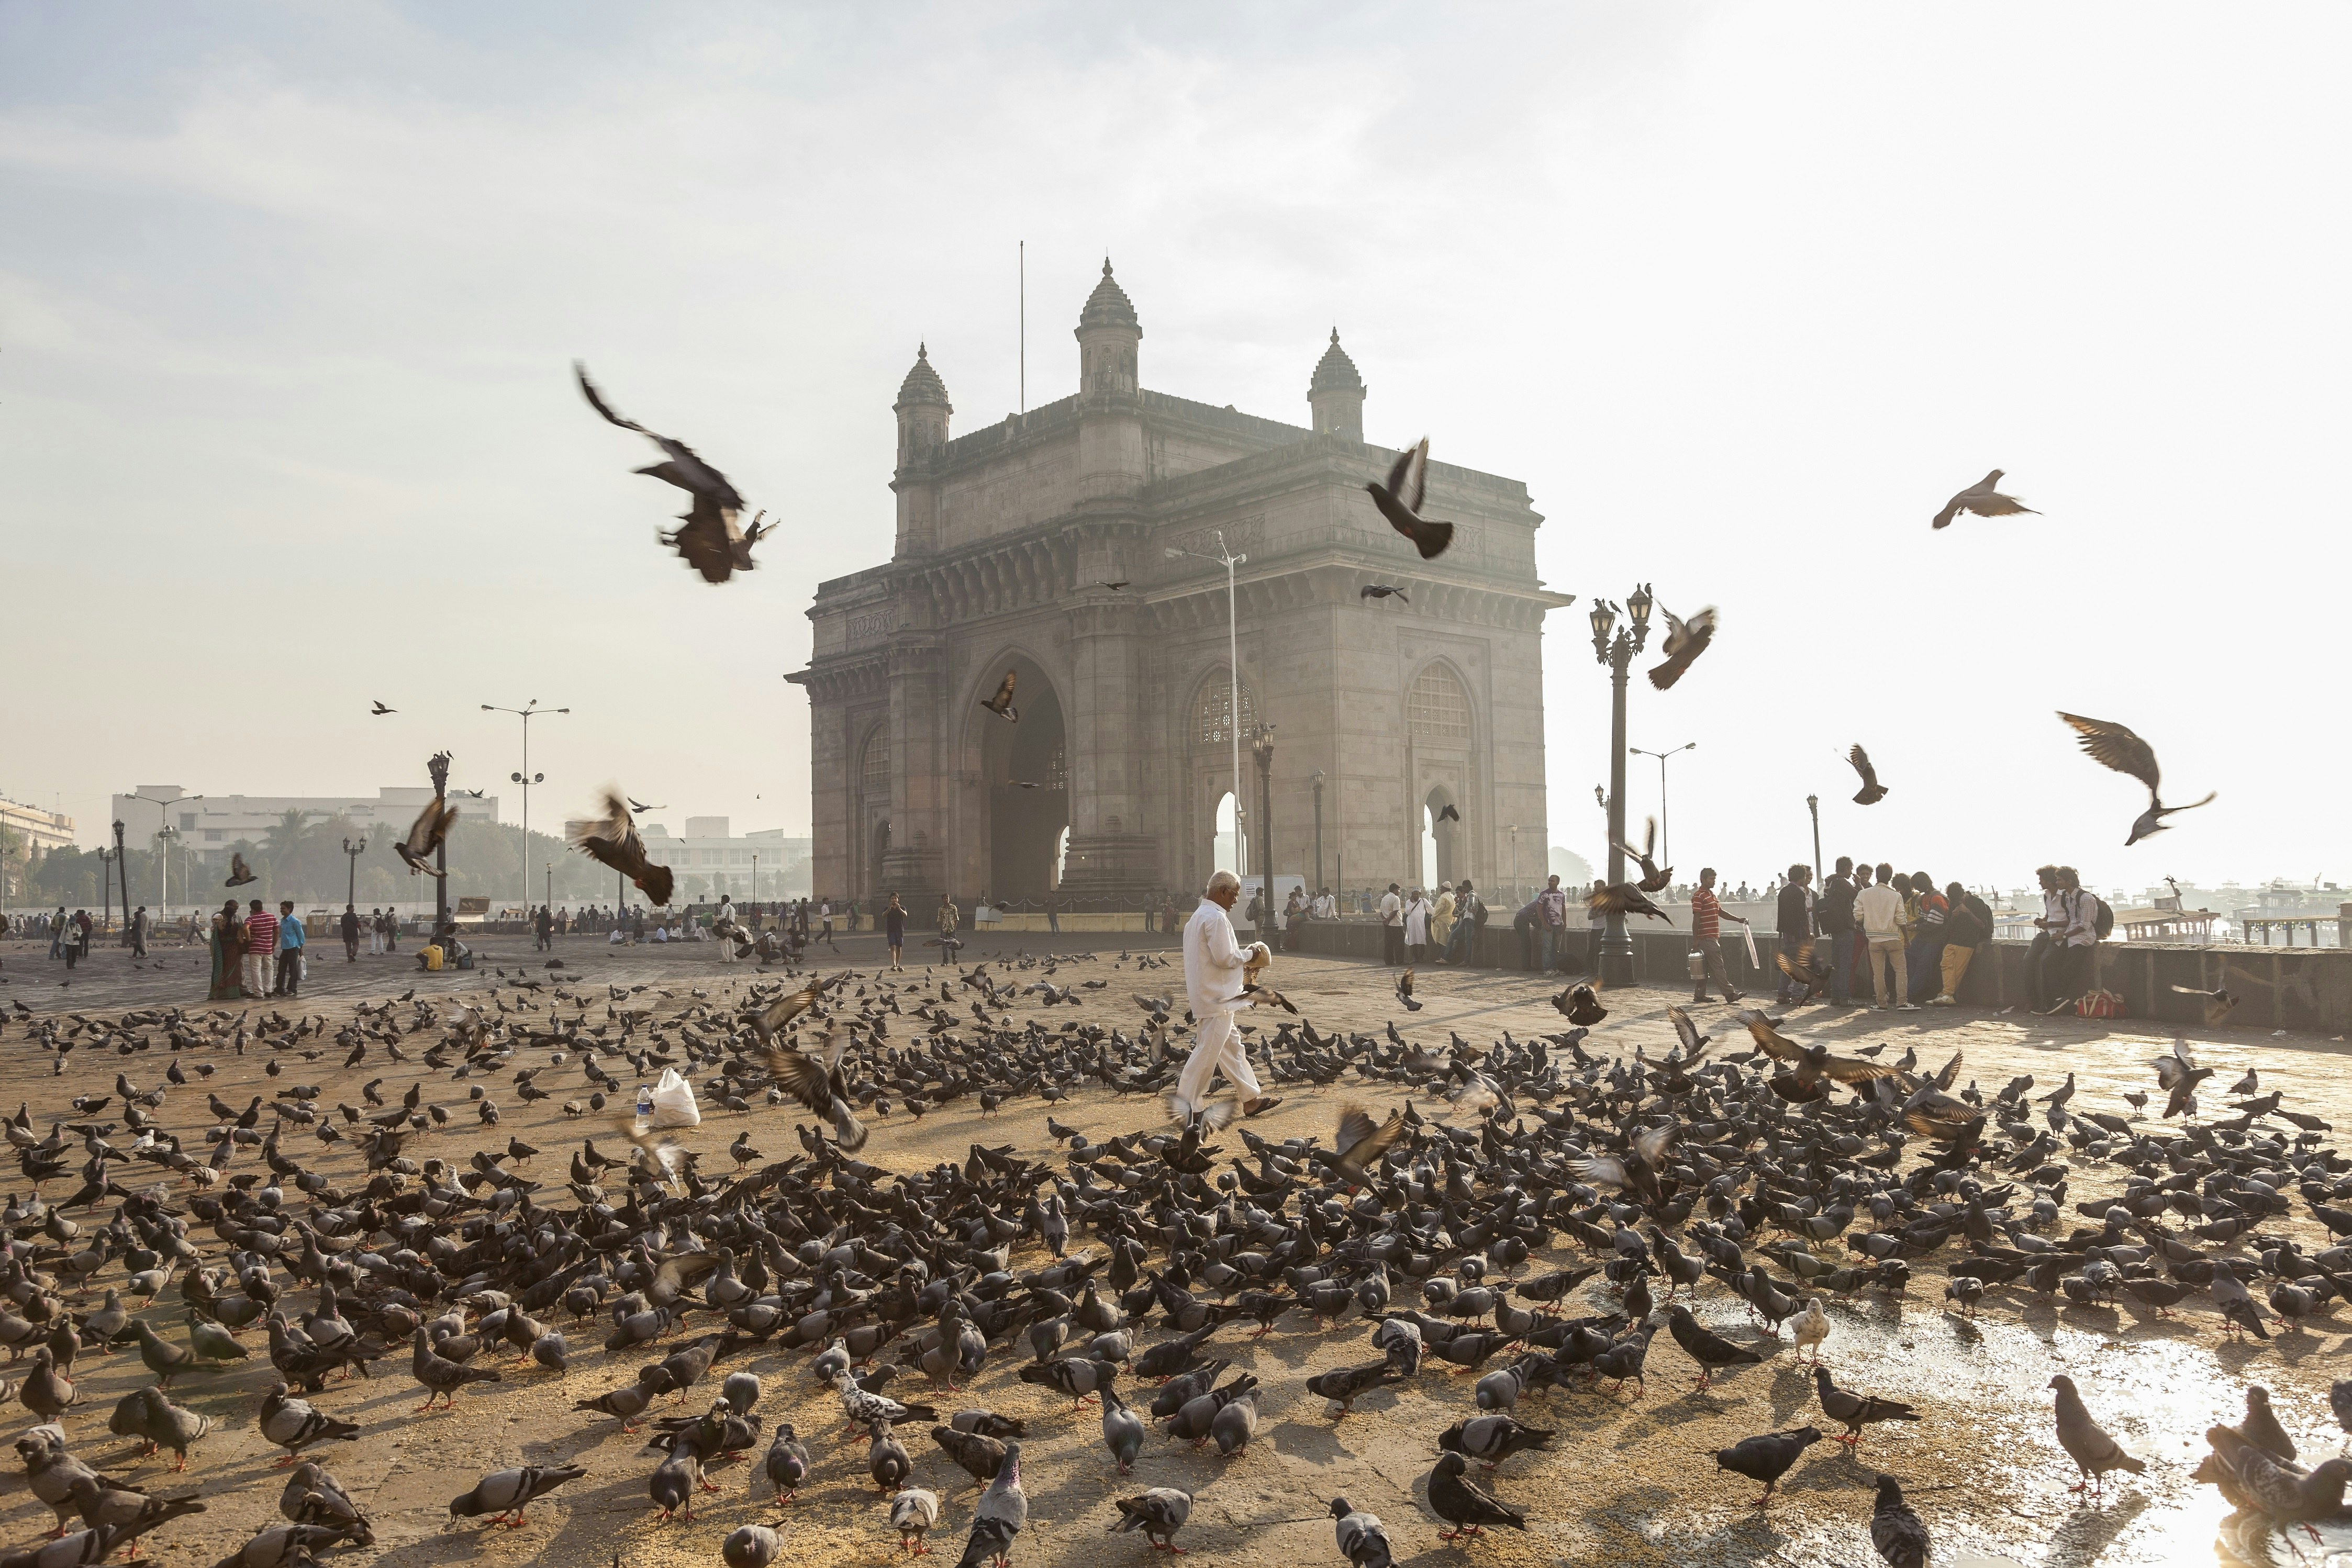 A lone figure, dressed all in white, walks through a flock of pigeons in front of the Gateway of India, a monumental stone arch, in Mumbai. Some of the pigeons have taken flight around the figure.